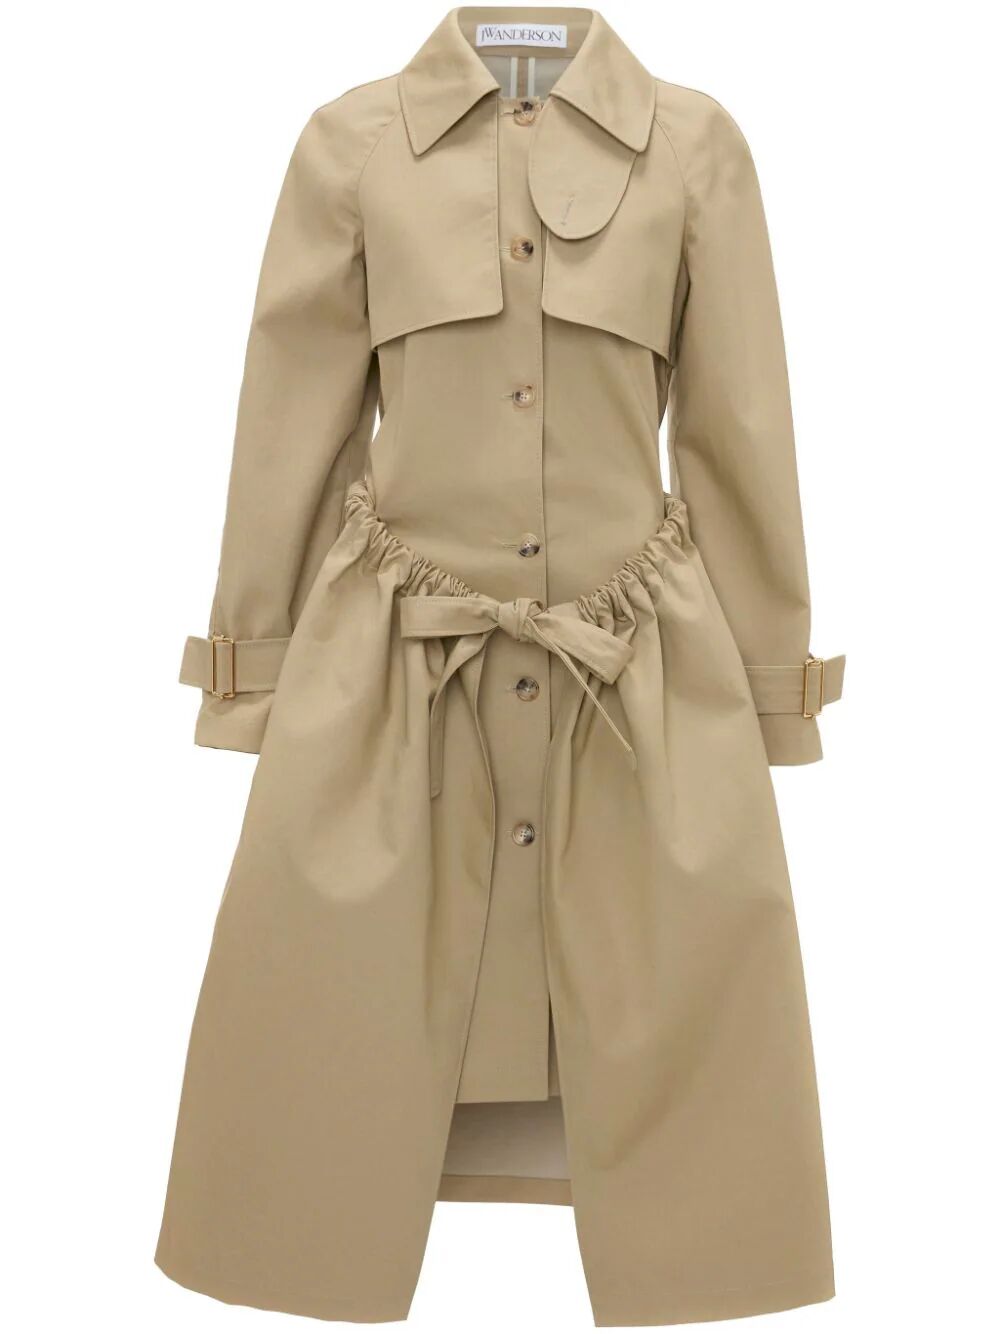 JW ANDERSON-GATHERED WAIST TRENCH COAT-CO0298 PG1529 132